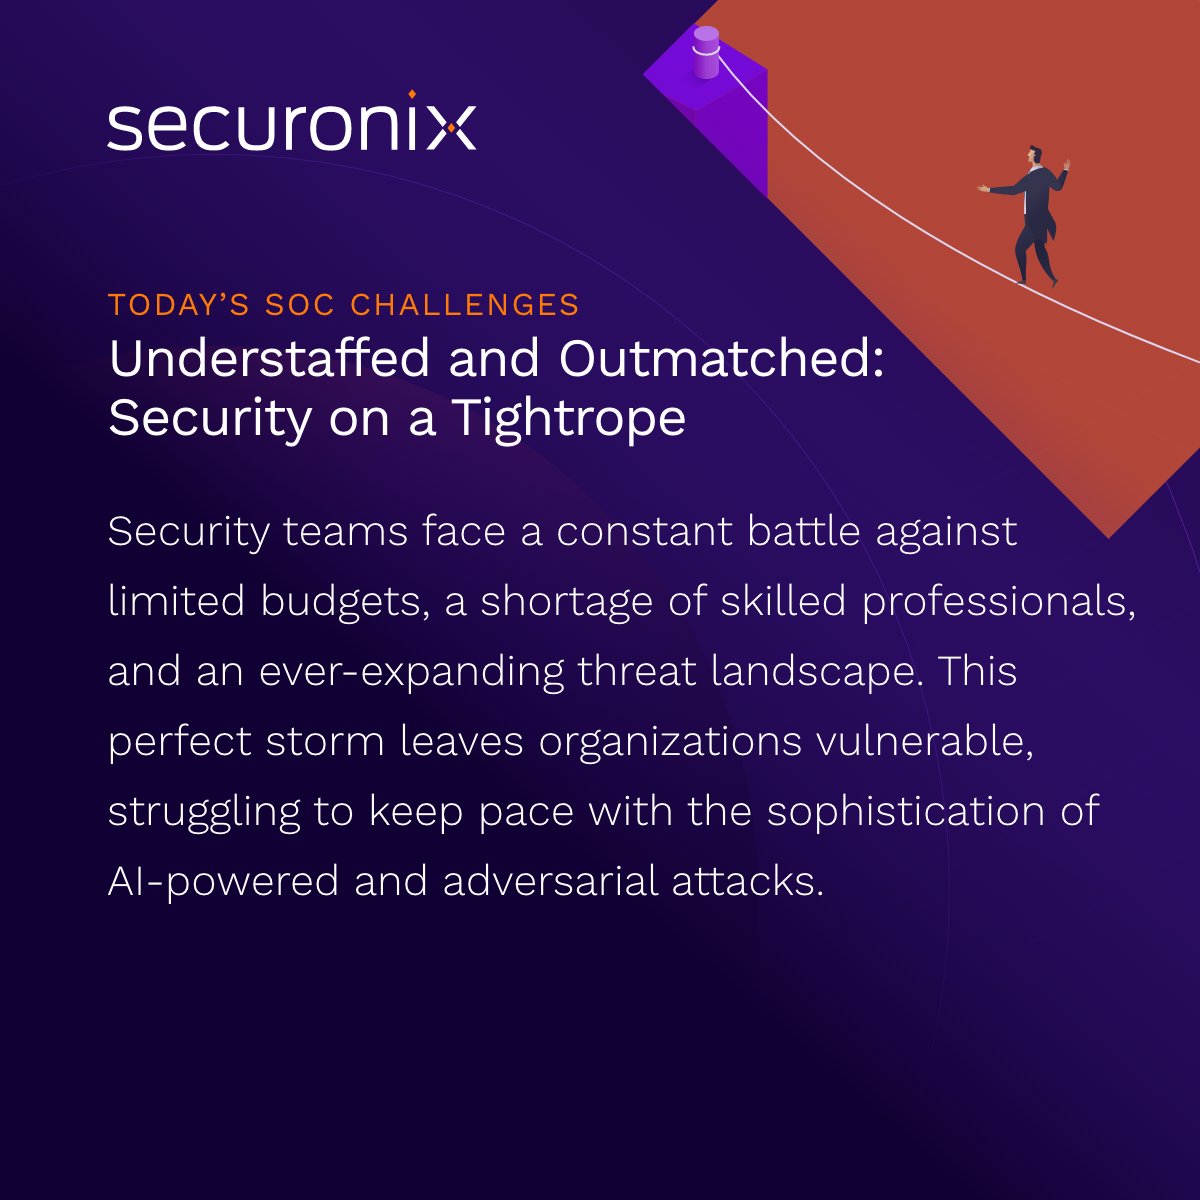 Is Your Security Team Overstretched? Limited budgets, a talent shortage, and a constantly evolving threat landscape create a perfect storm for overwhelmed security teams. The future of AI-Reinforced CyberOps arrives April 30th. Stay tuned to find out more! sc.securonix.com/u/cp2LV5